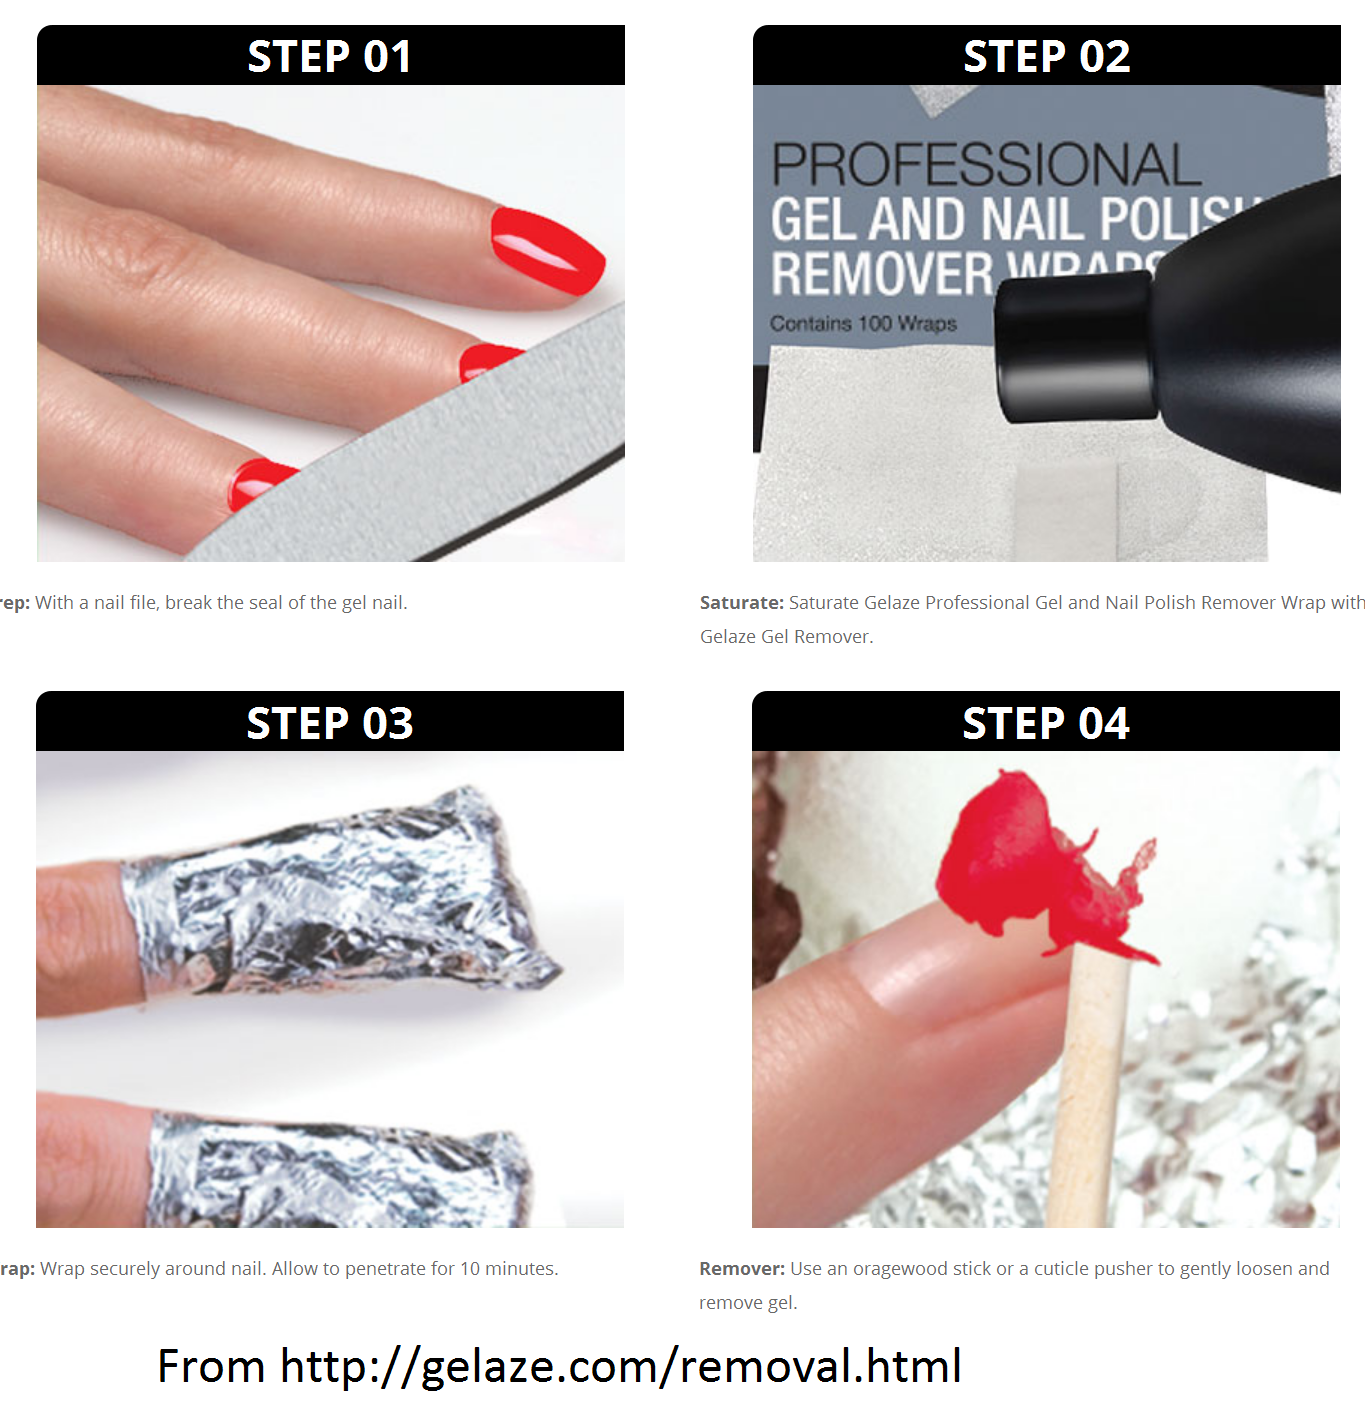 How to remove gel dip nails